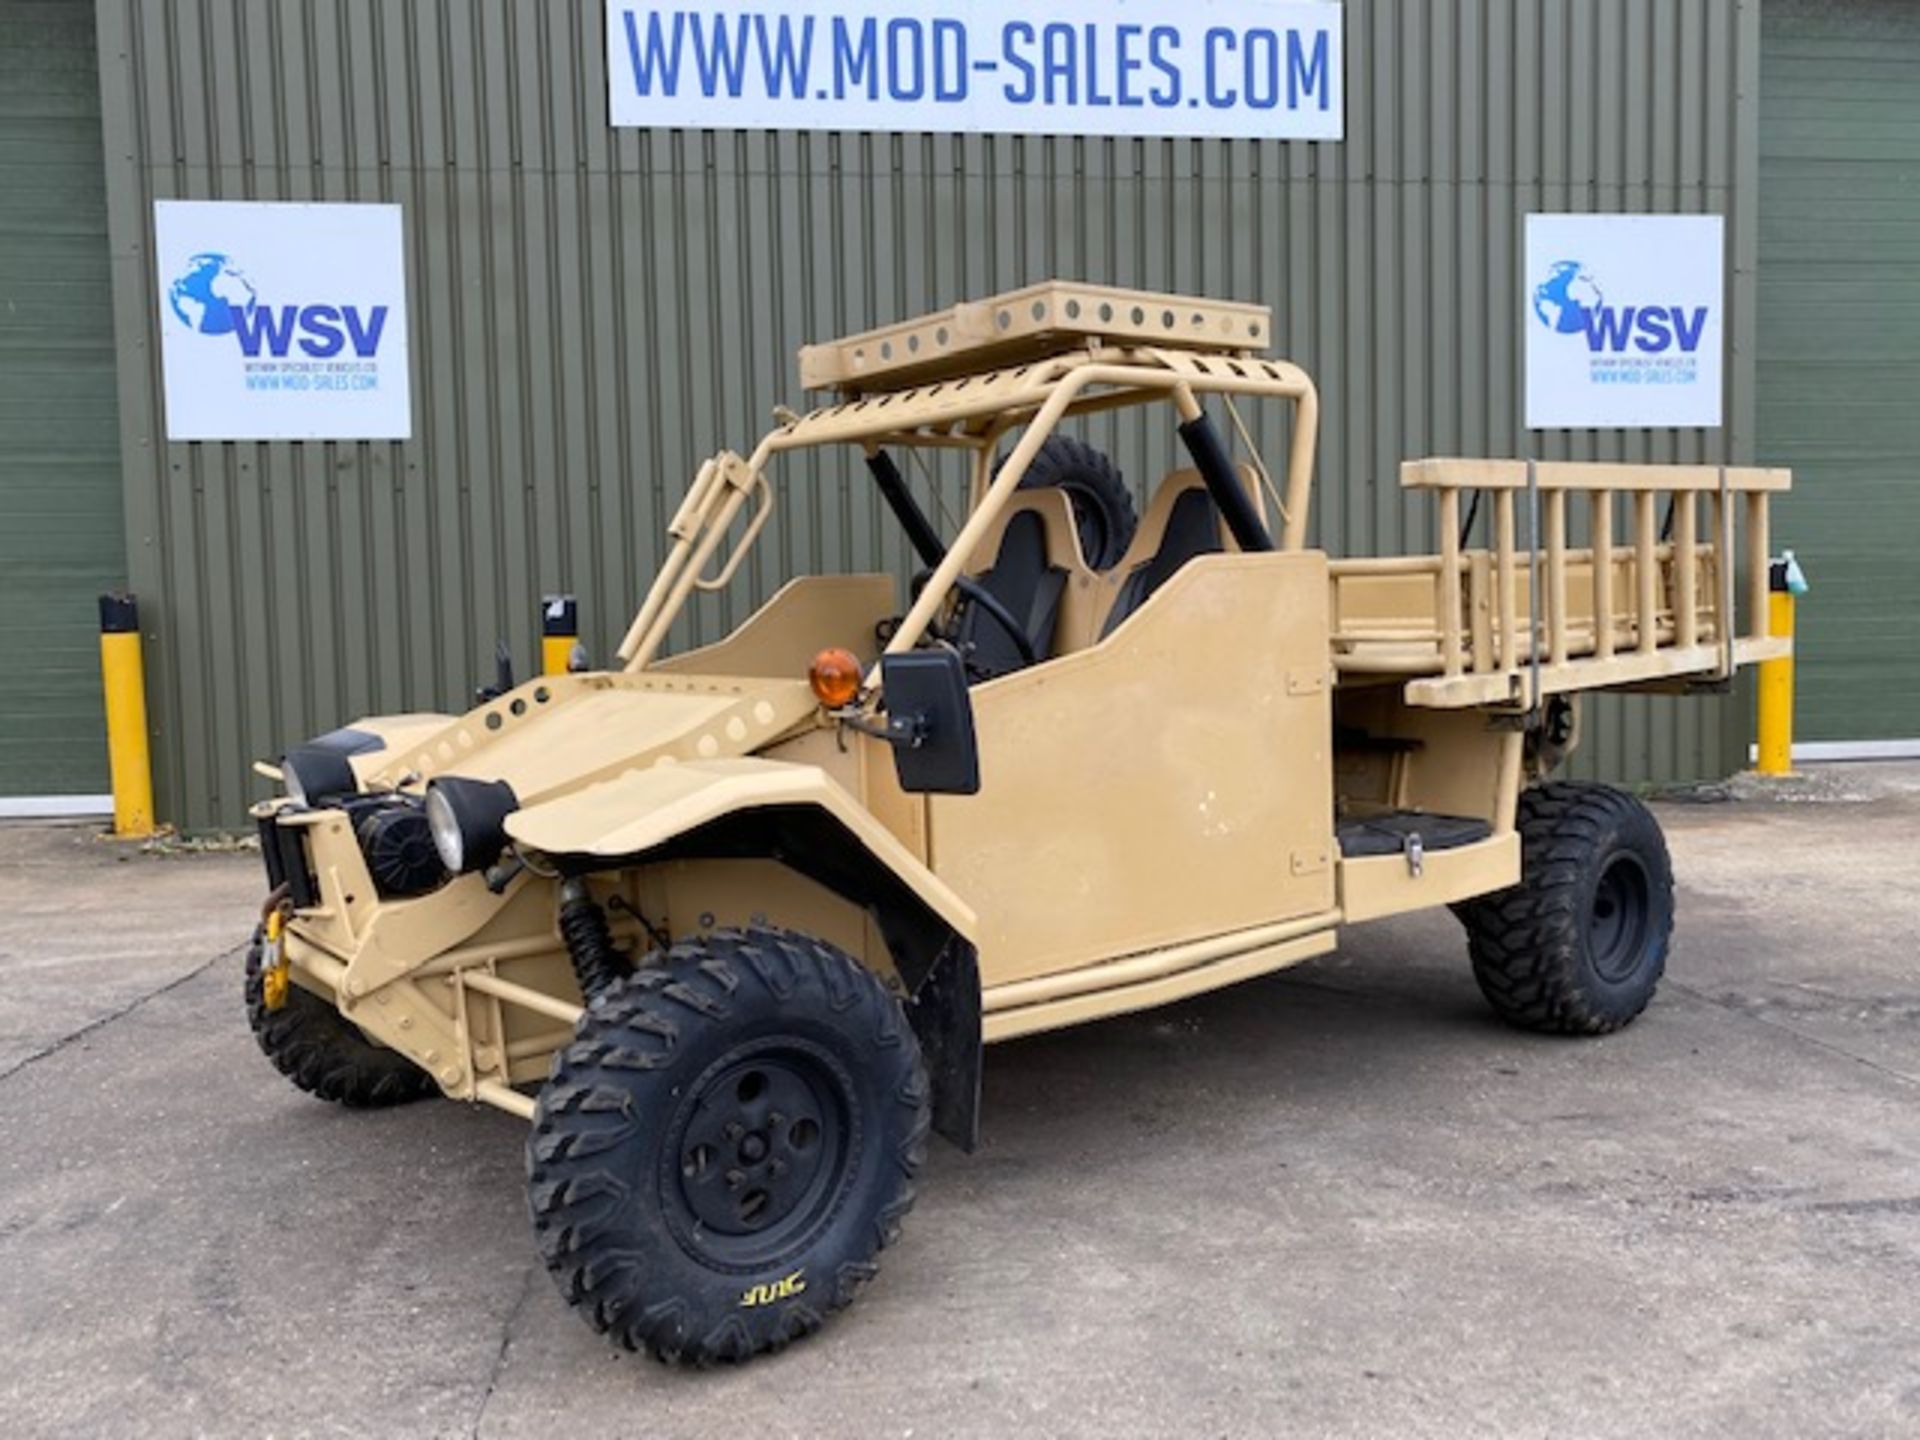 Enhanced Protection Systems (EPS) Springer ATV Only 717 Kms ex Reserve MOD